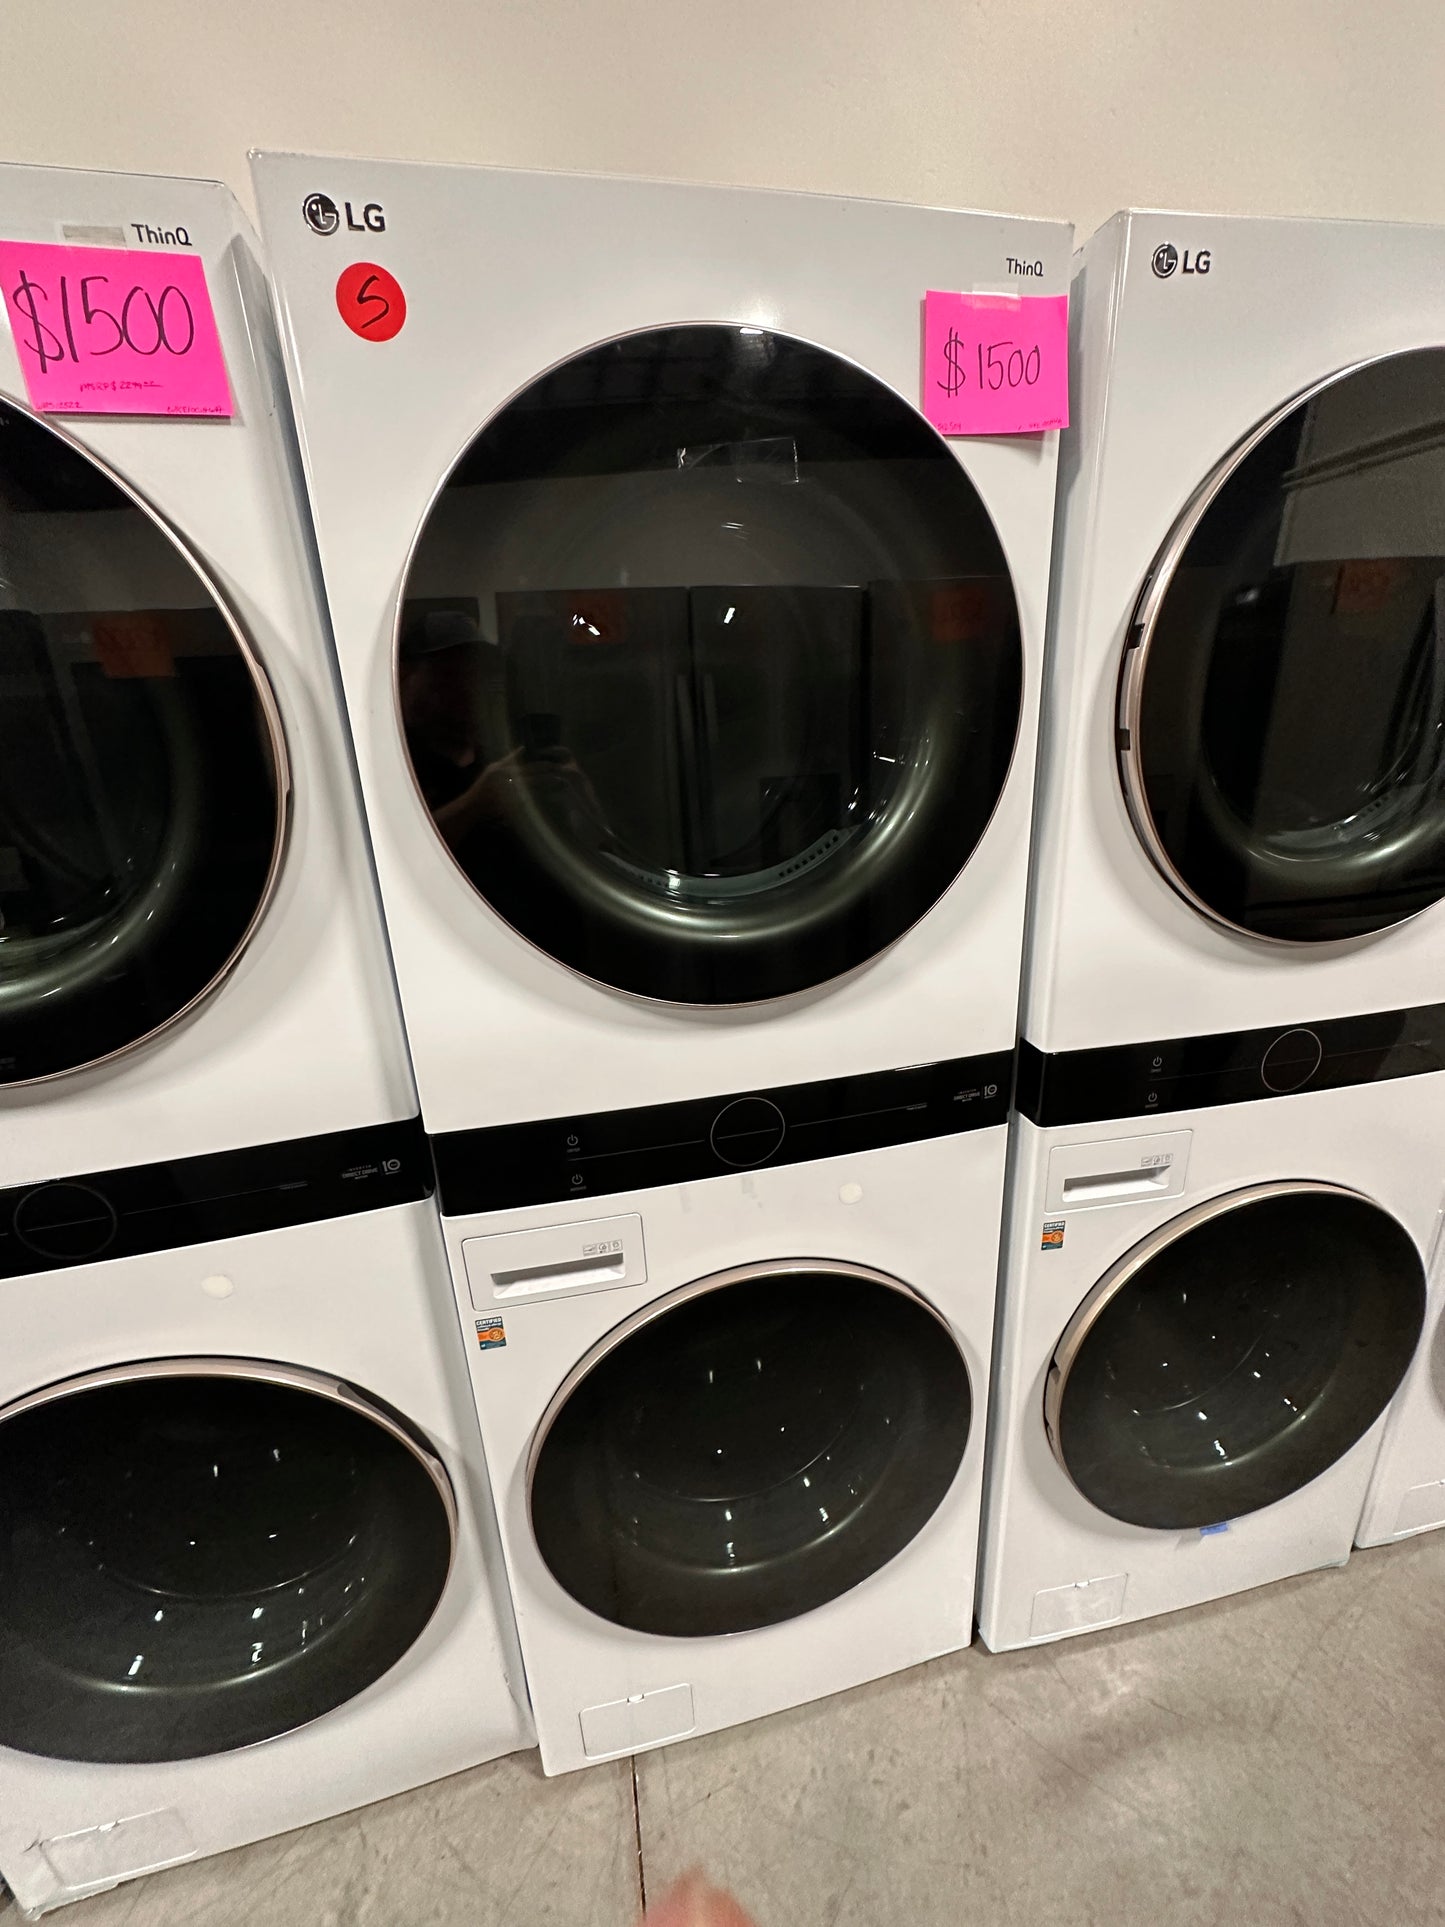 NEW SMART LG WASHTOWER WITH ELECTRIC DRYER - WAS12504